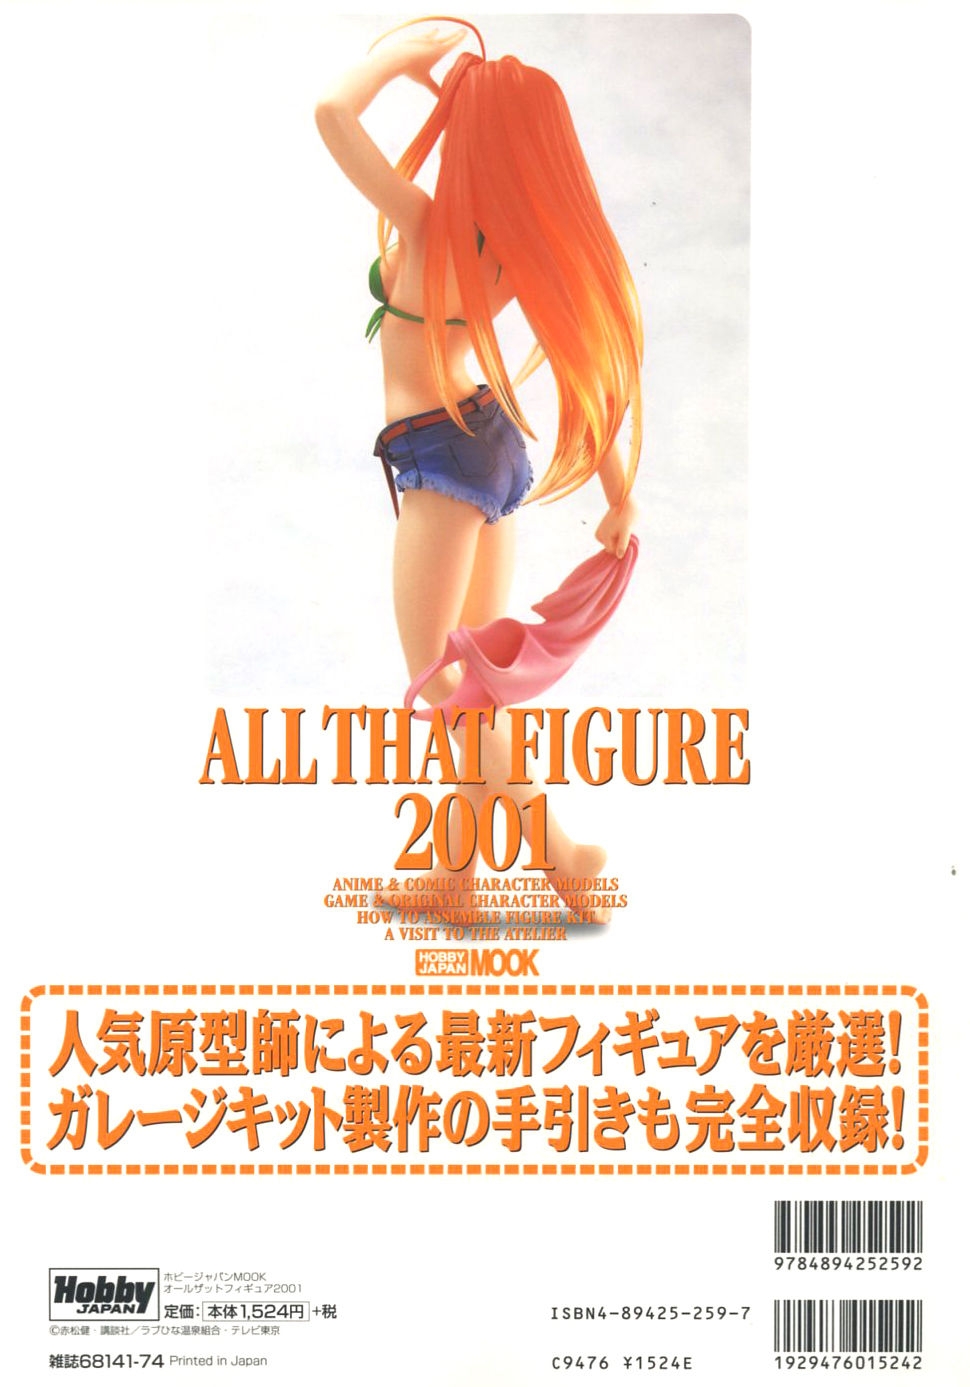 Hobby Japan Mook All That Figure 2001 1